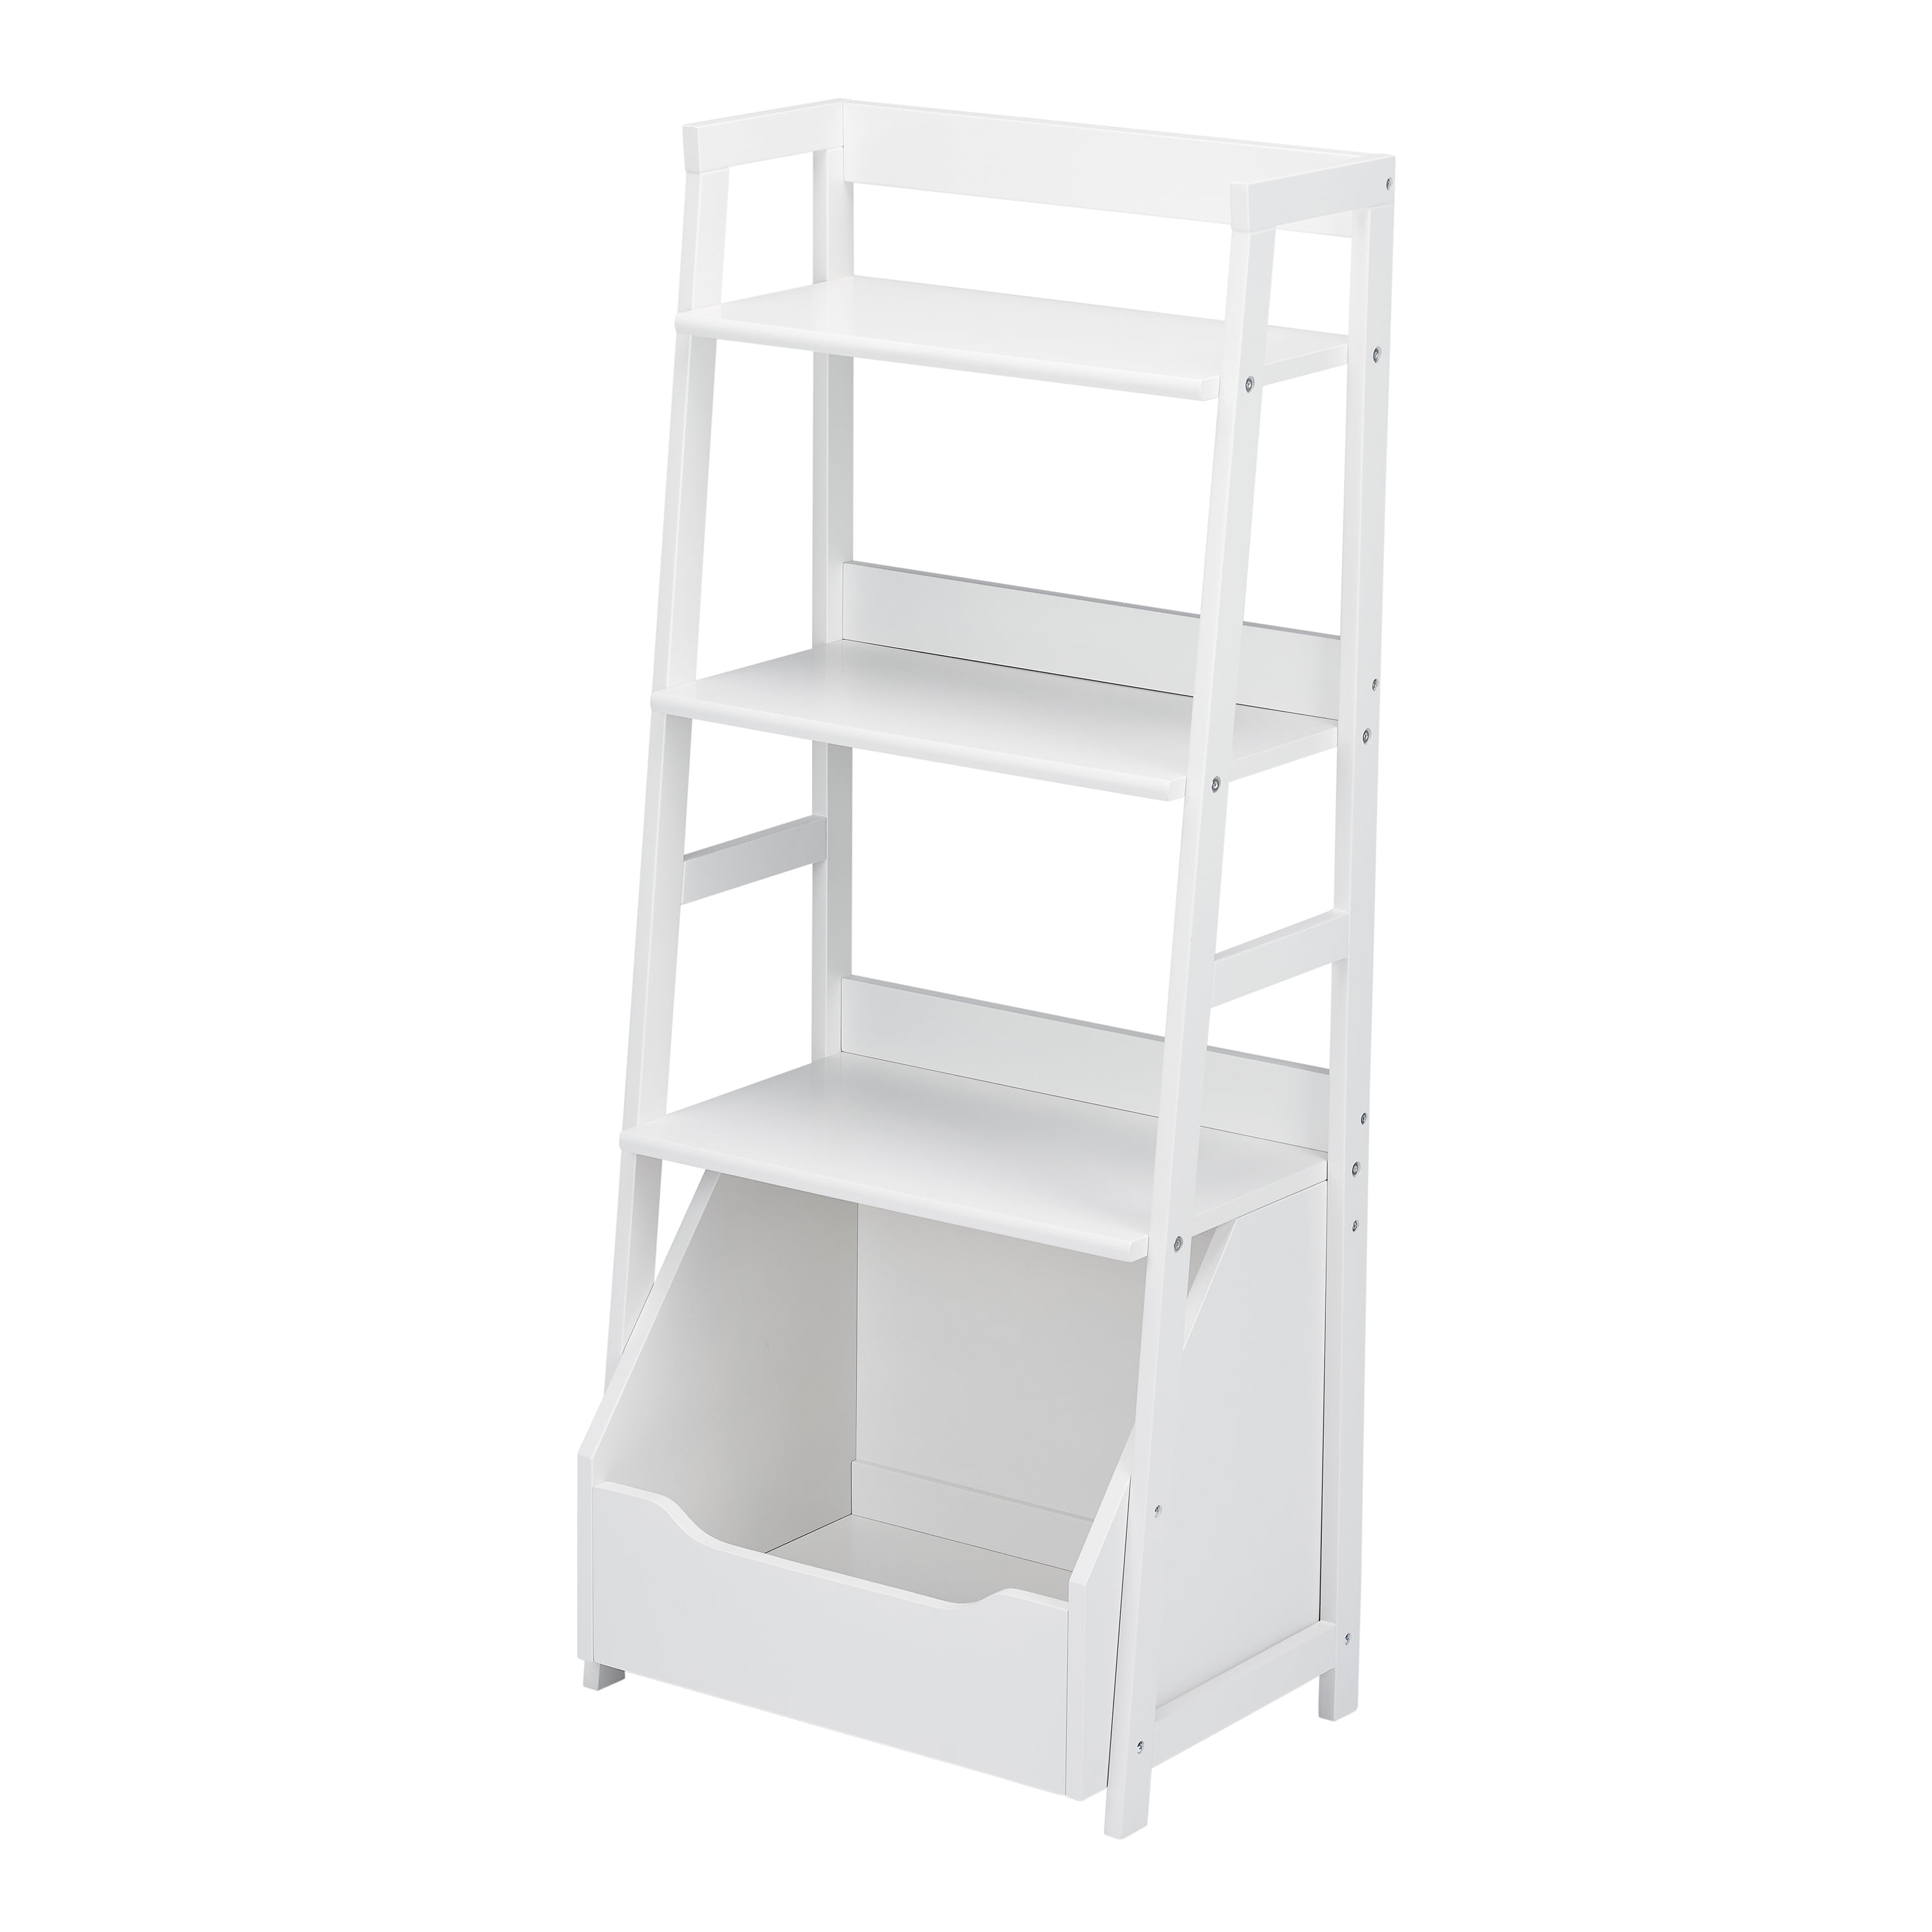 Your Zone White Painted Ladder Bookcase, White Painted Shelves